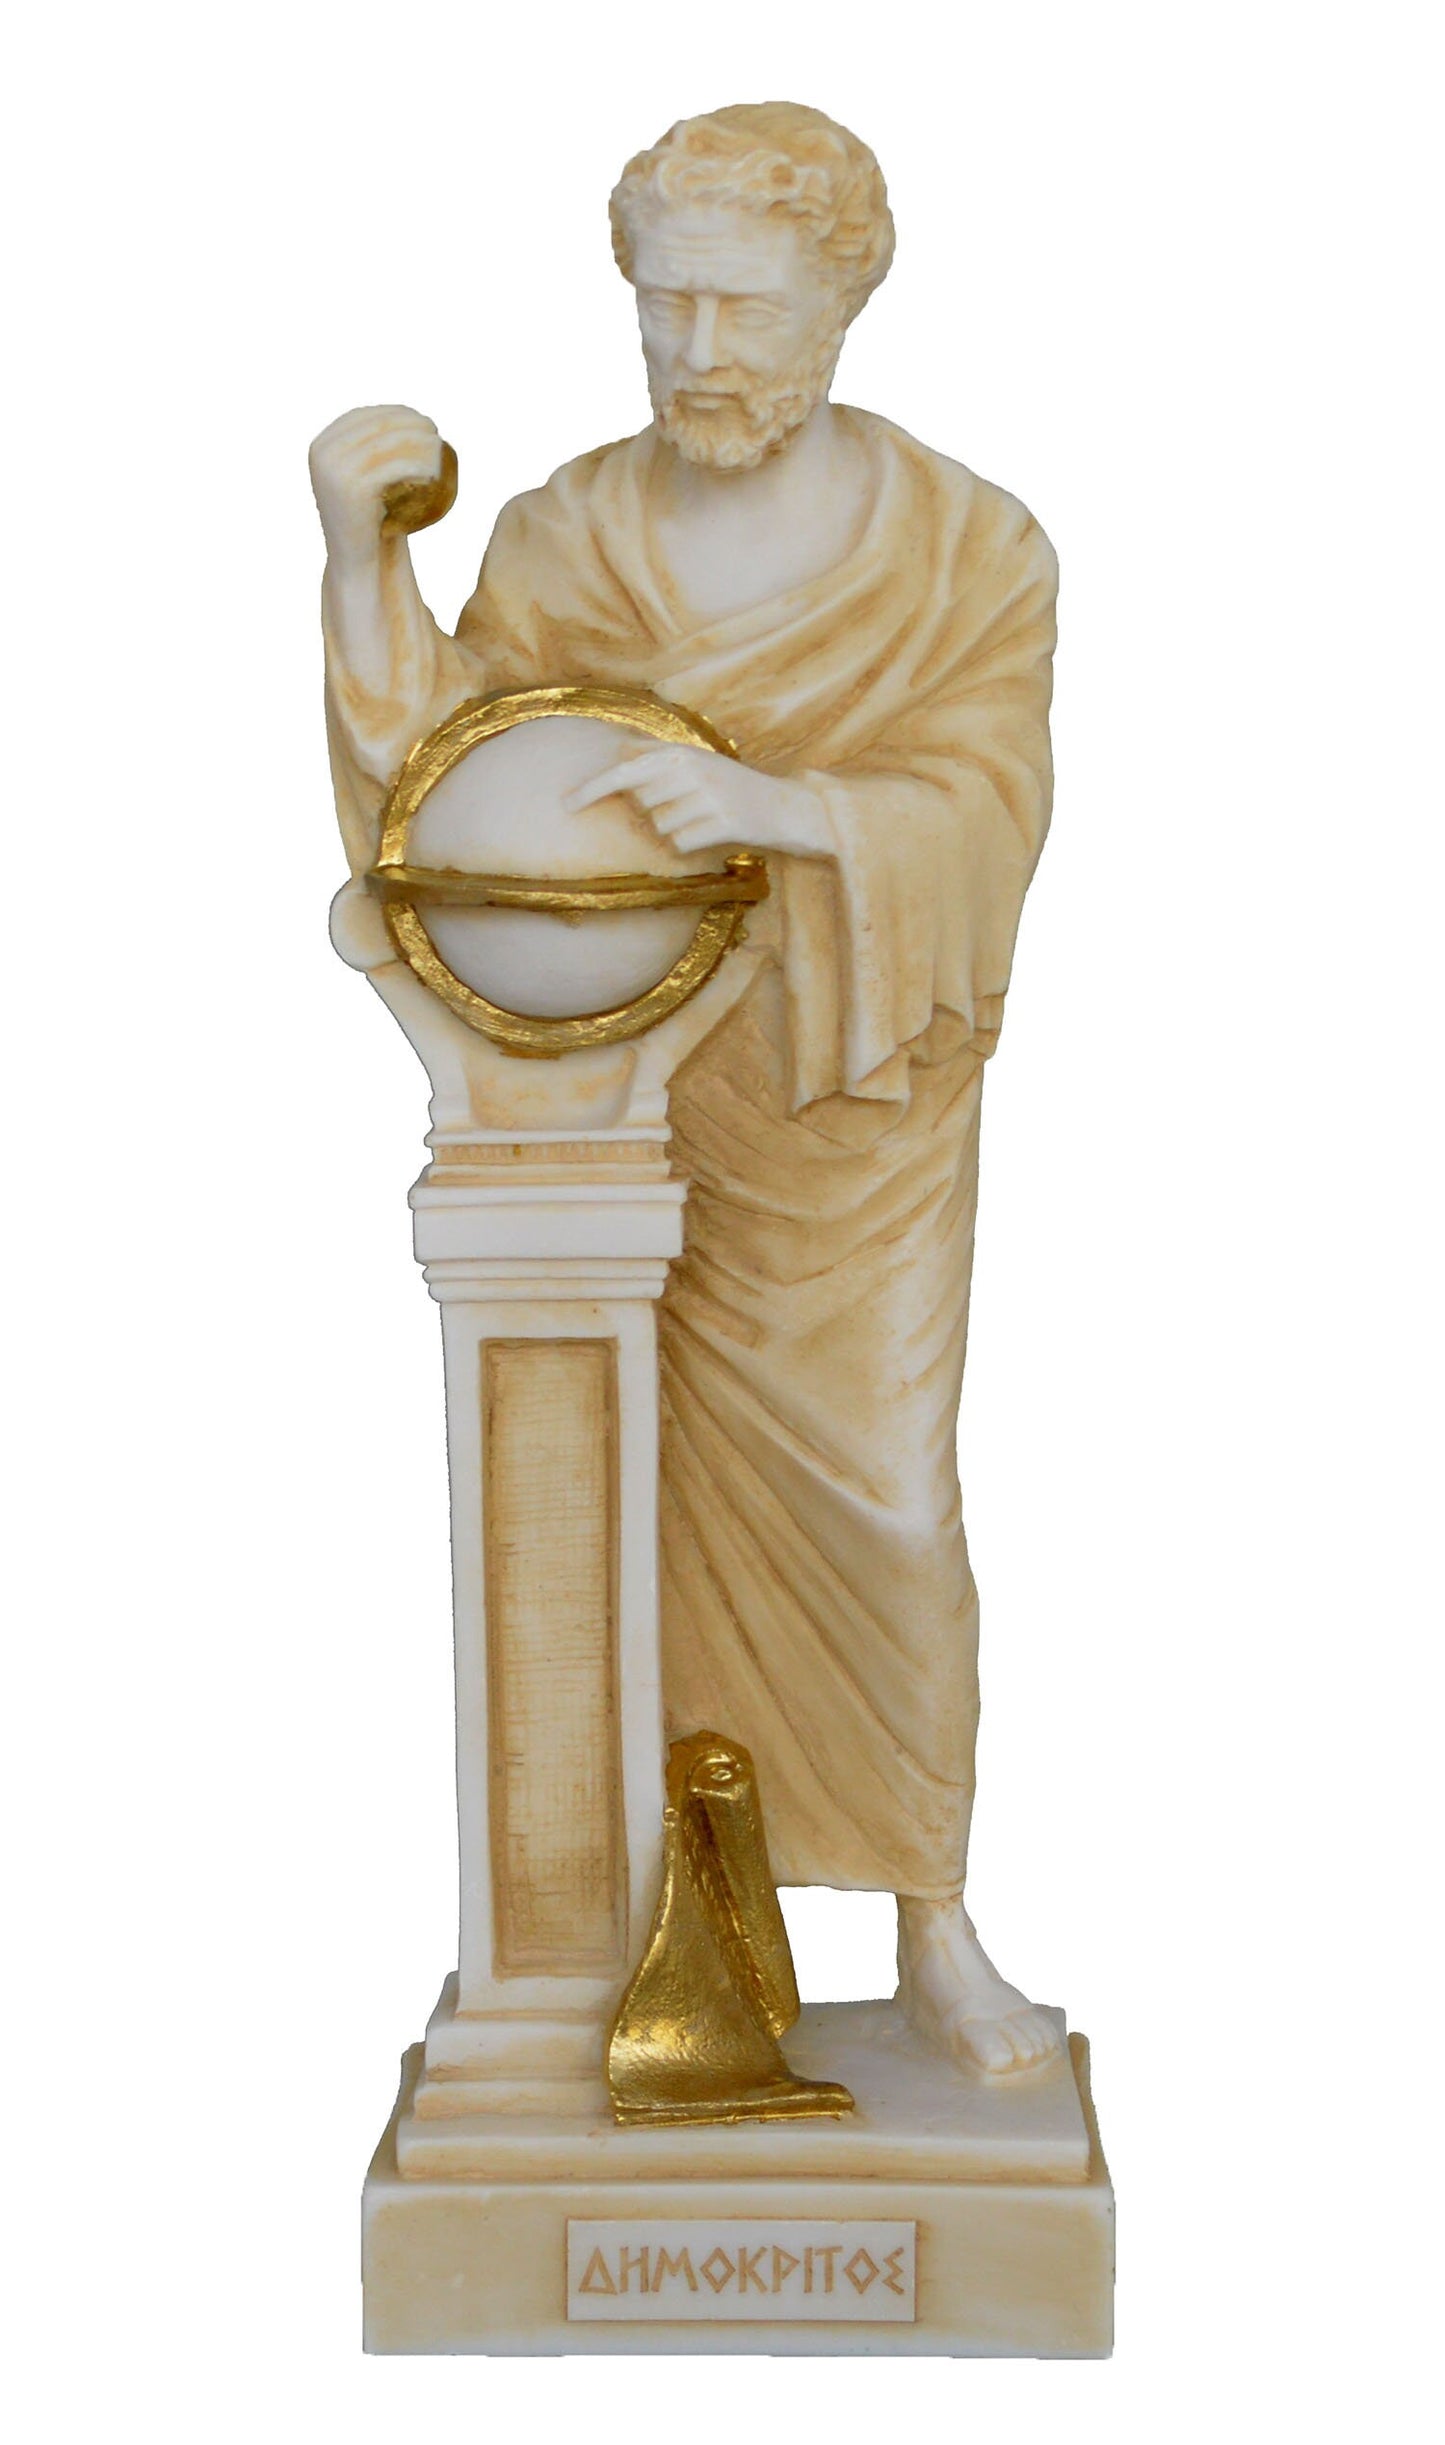 Democritus - Ancient Greek Philosopher, Scientist - Atomic Theory of the Universe - Aged Alabaster Statue